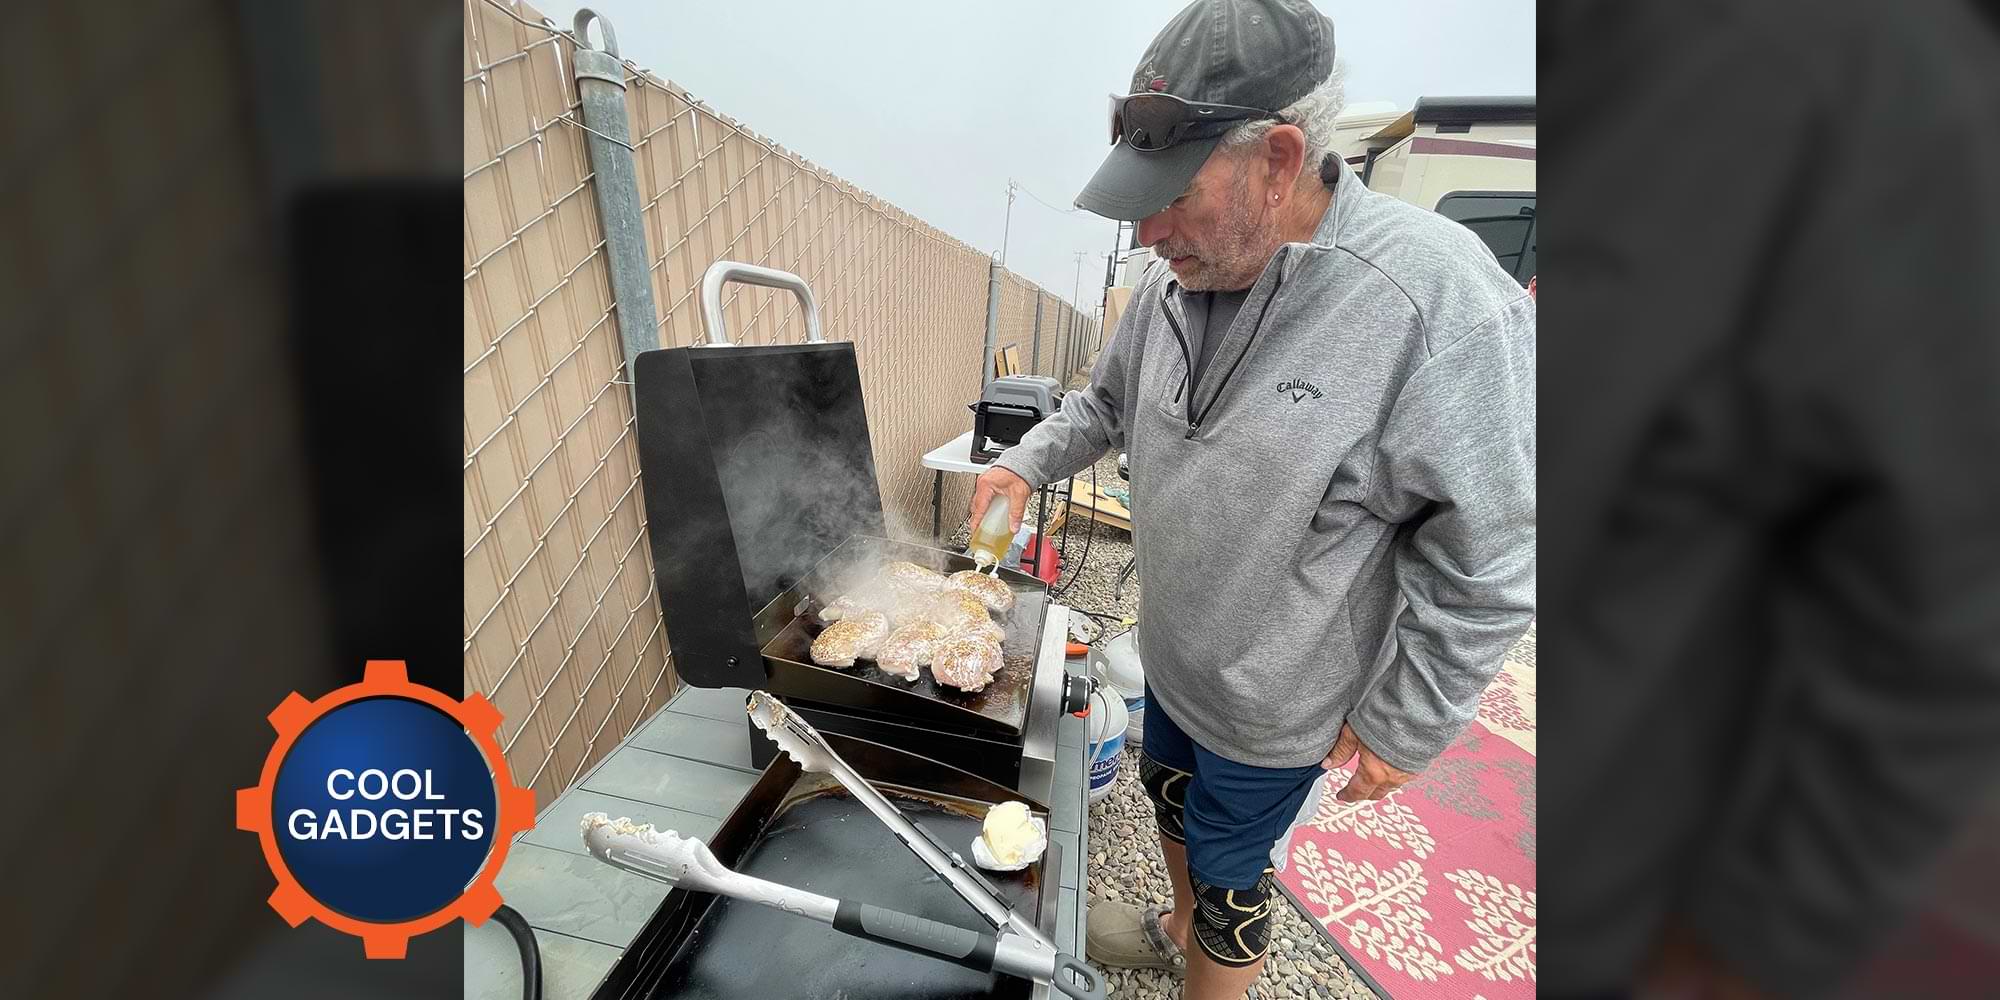 a man stands cooking with a table top grill near a fence and RV